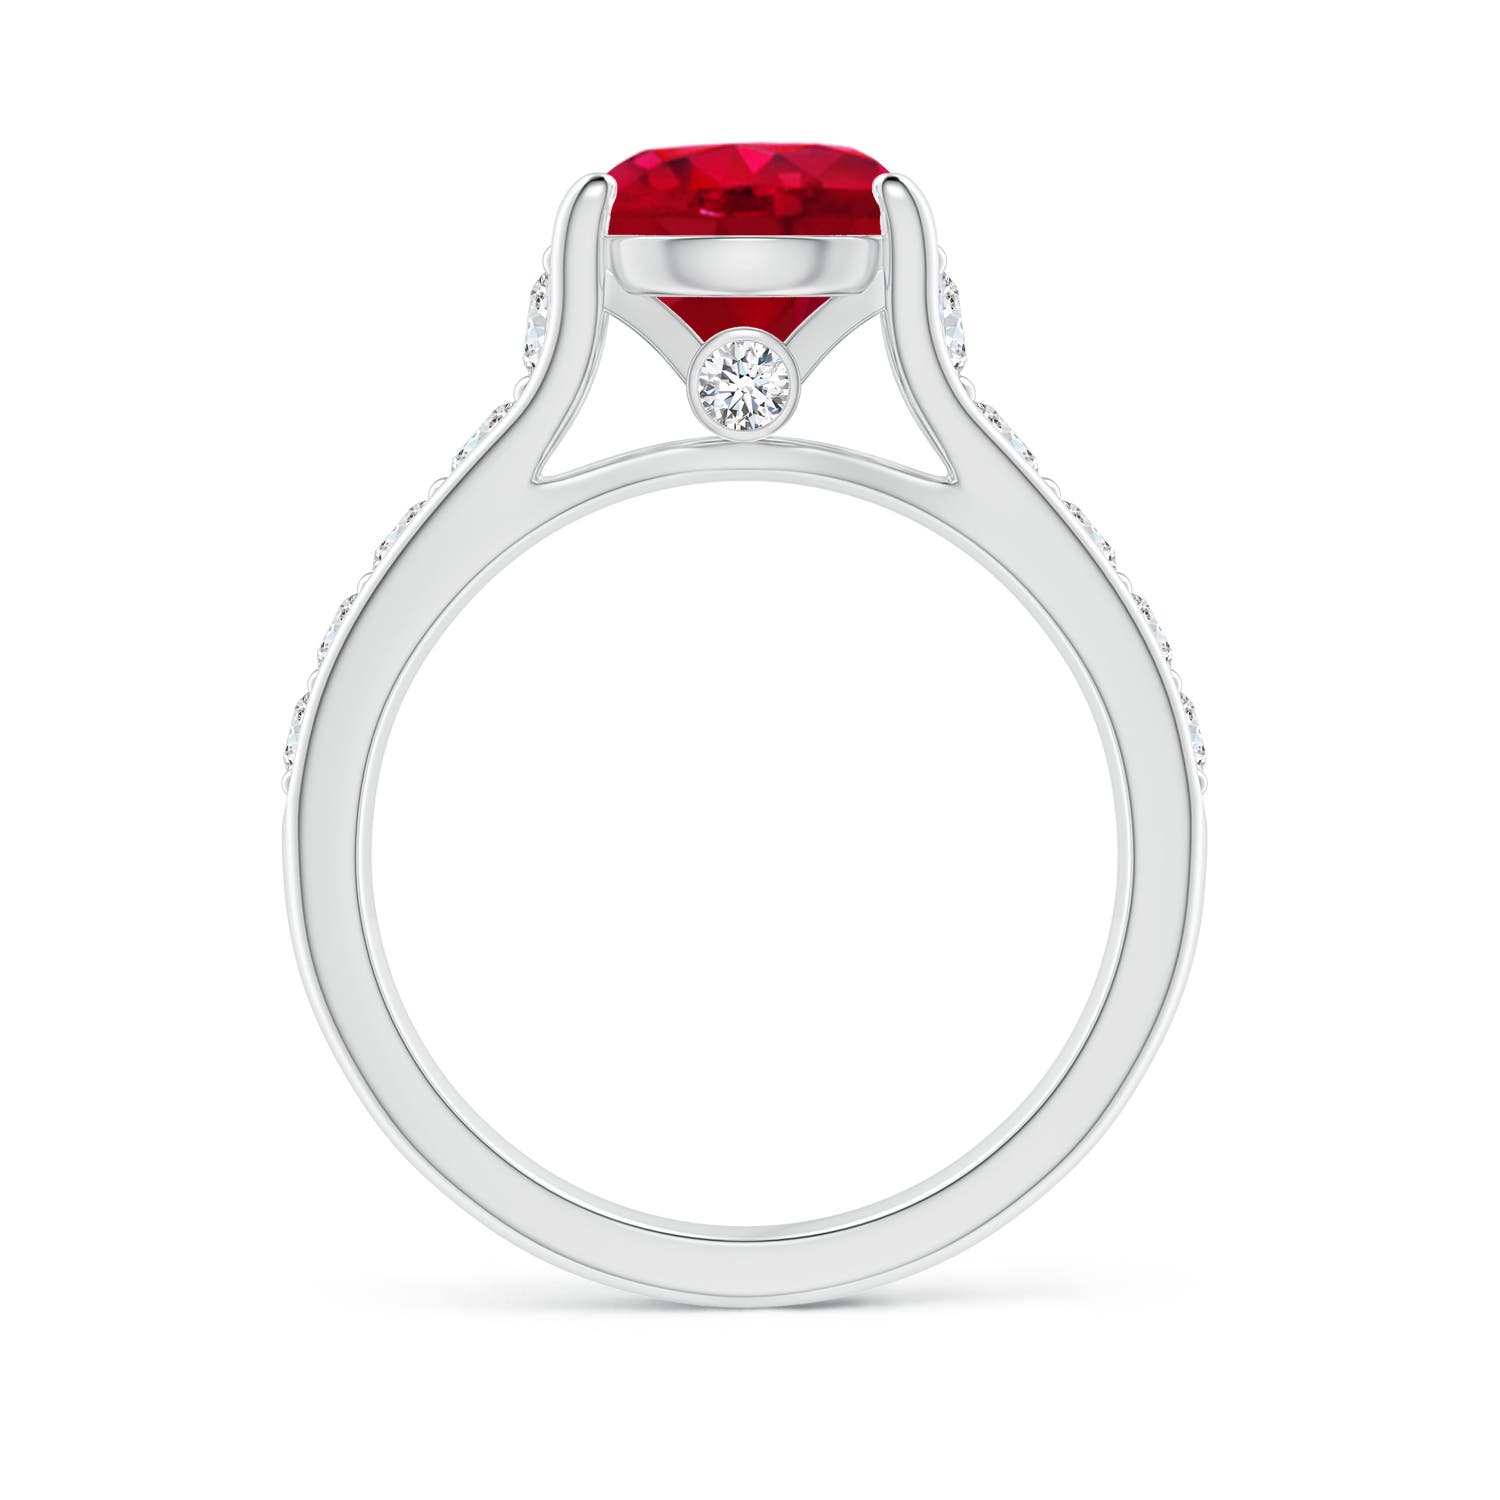 AAA - Ruby / 2.8 CT / 14 KT White Gold